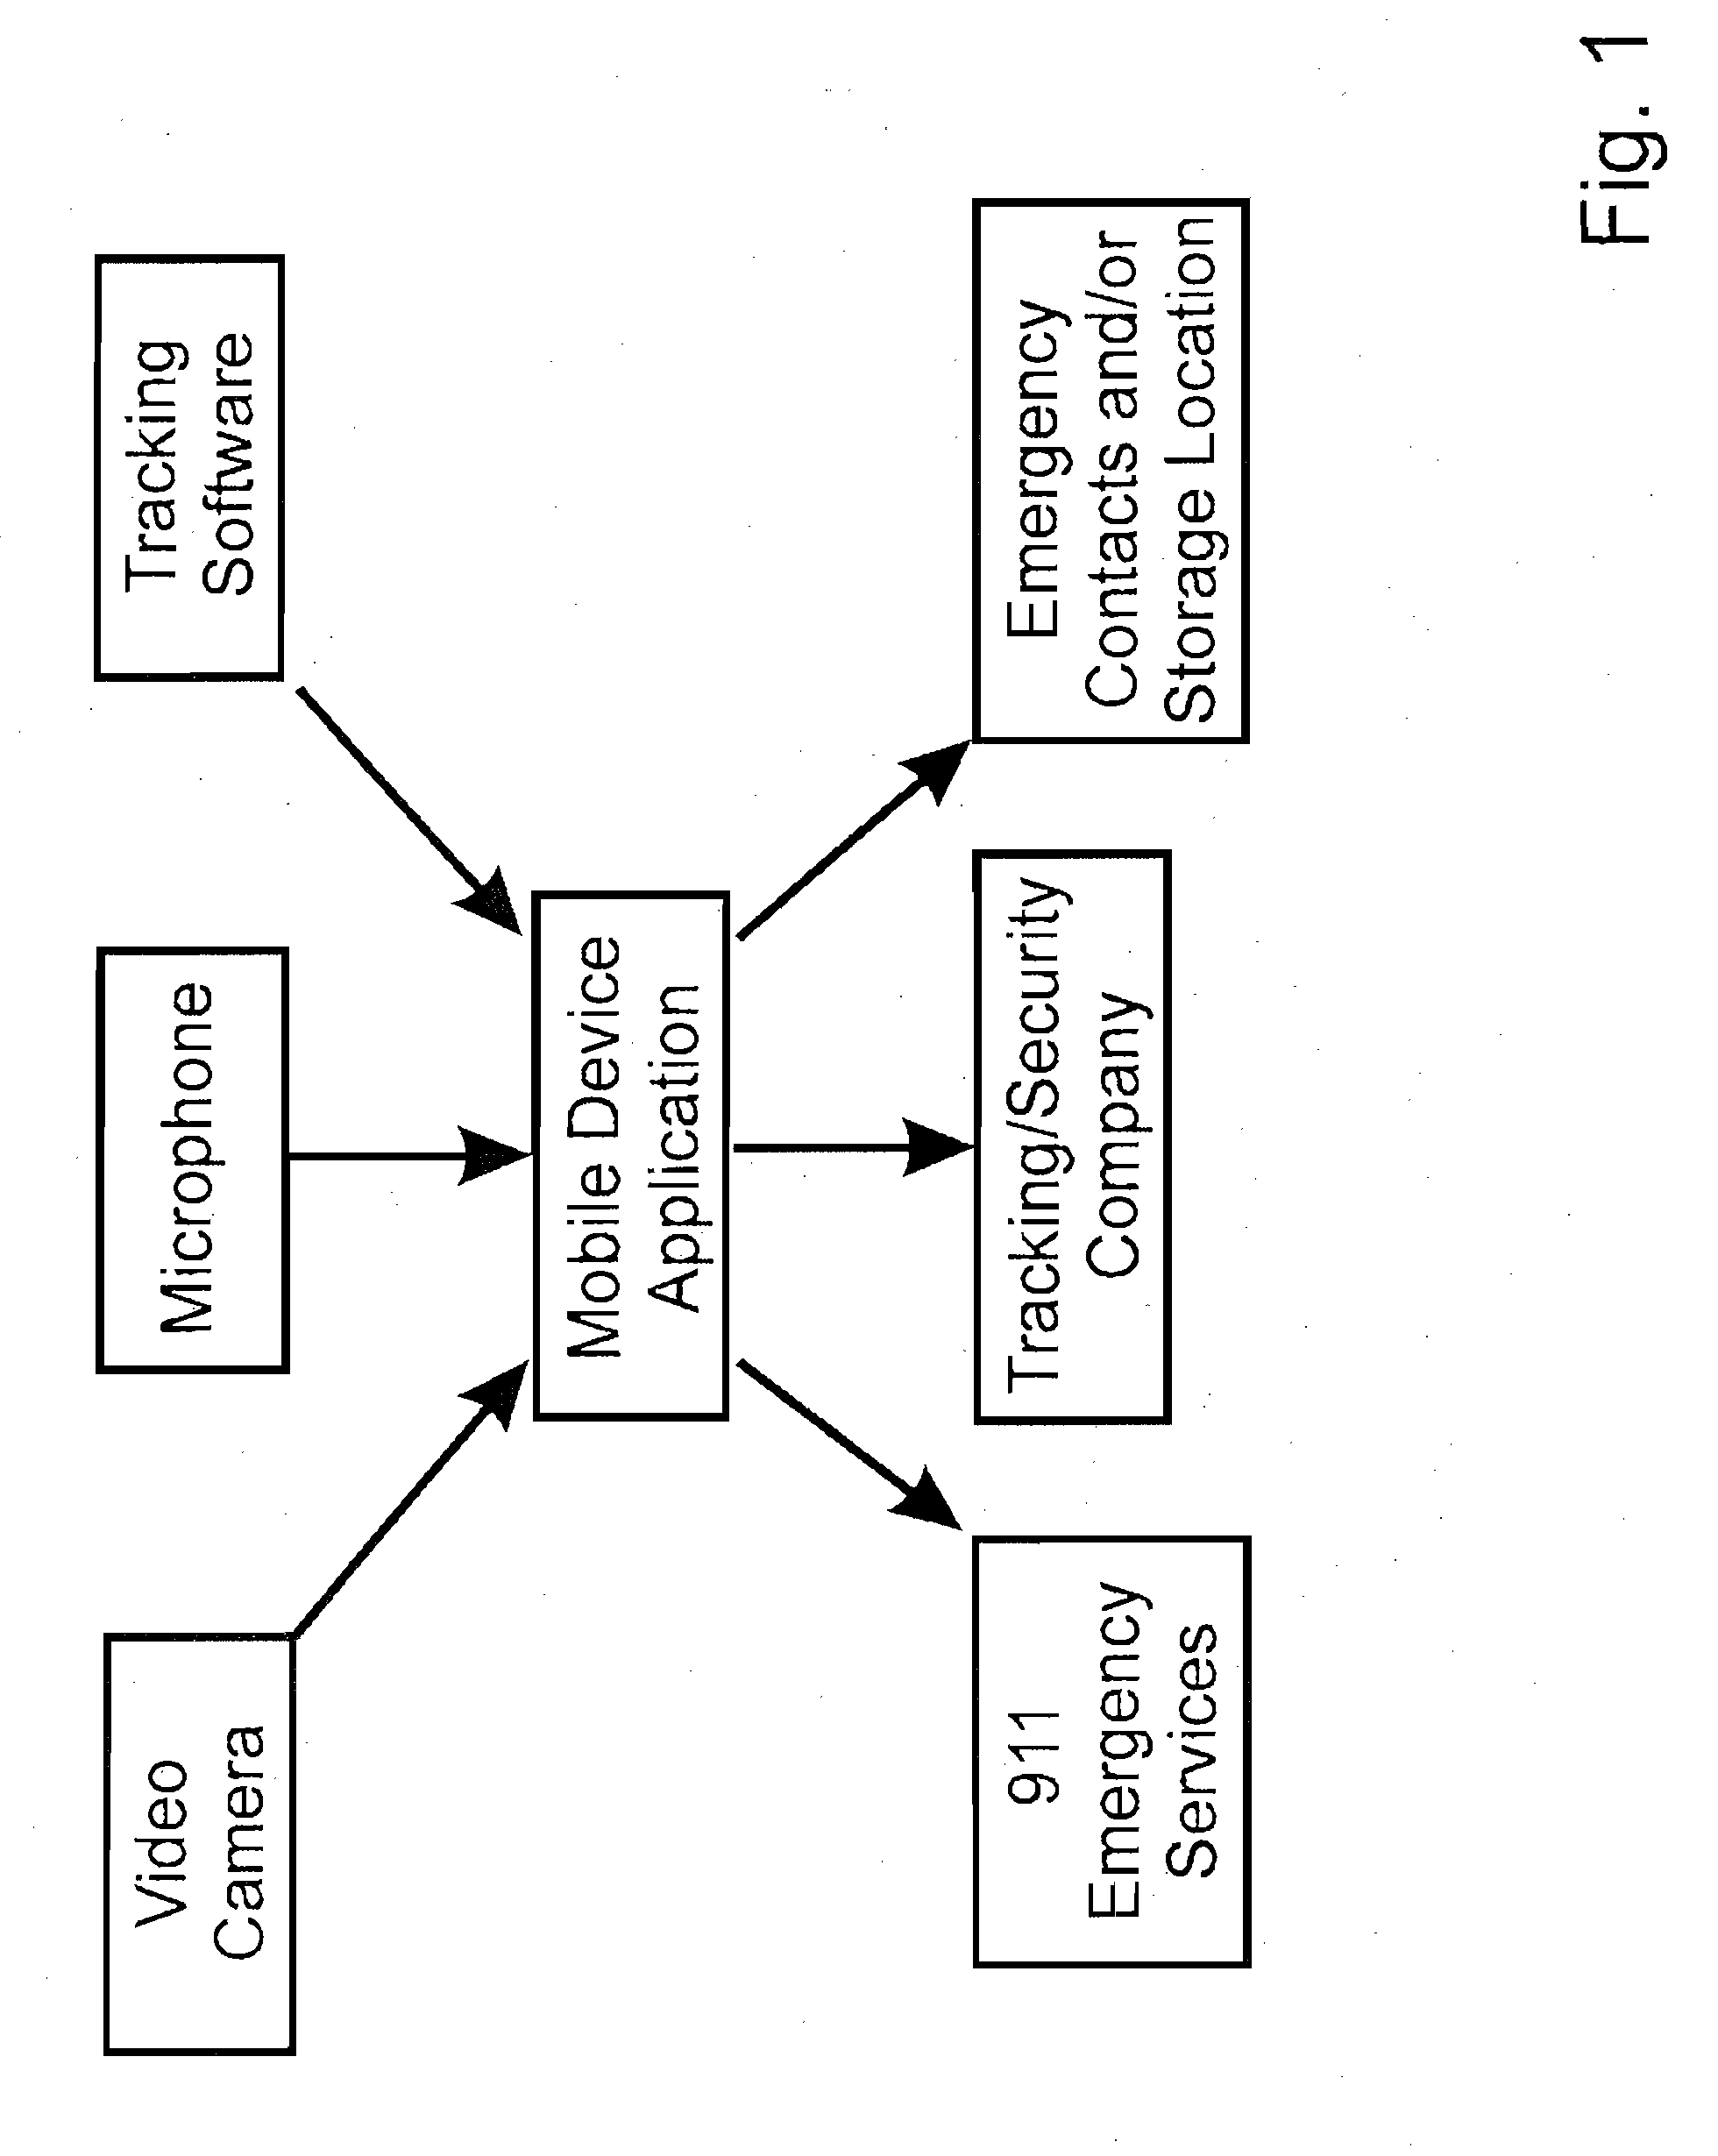 Notification and Tracking System for Mobile Devices